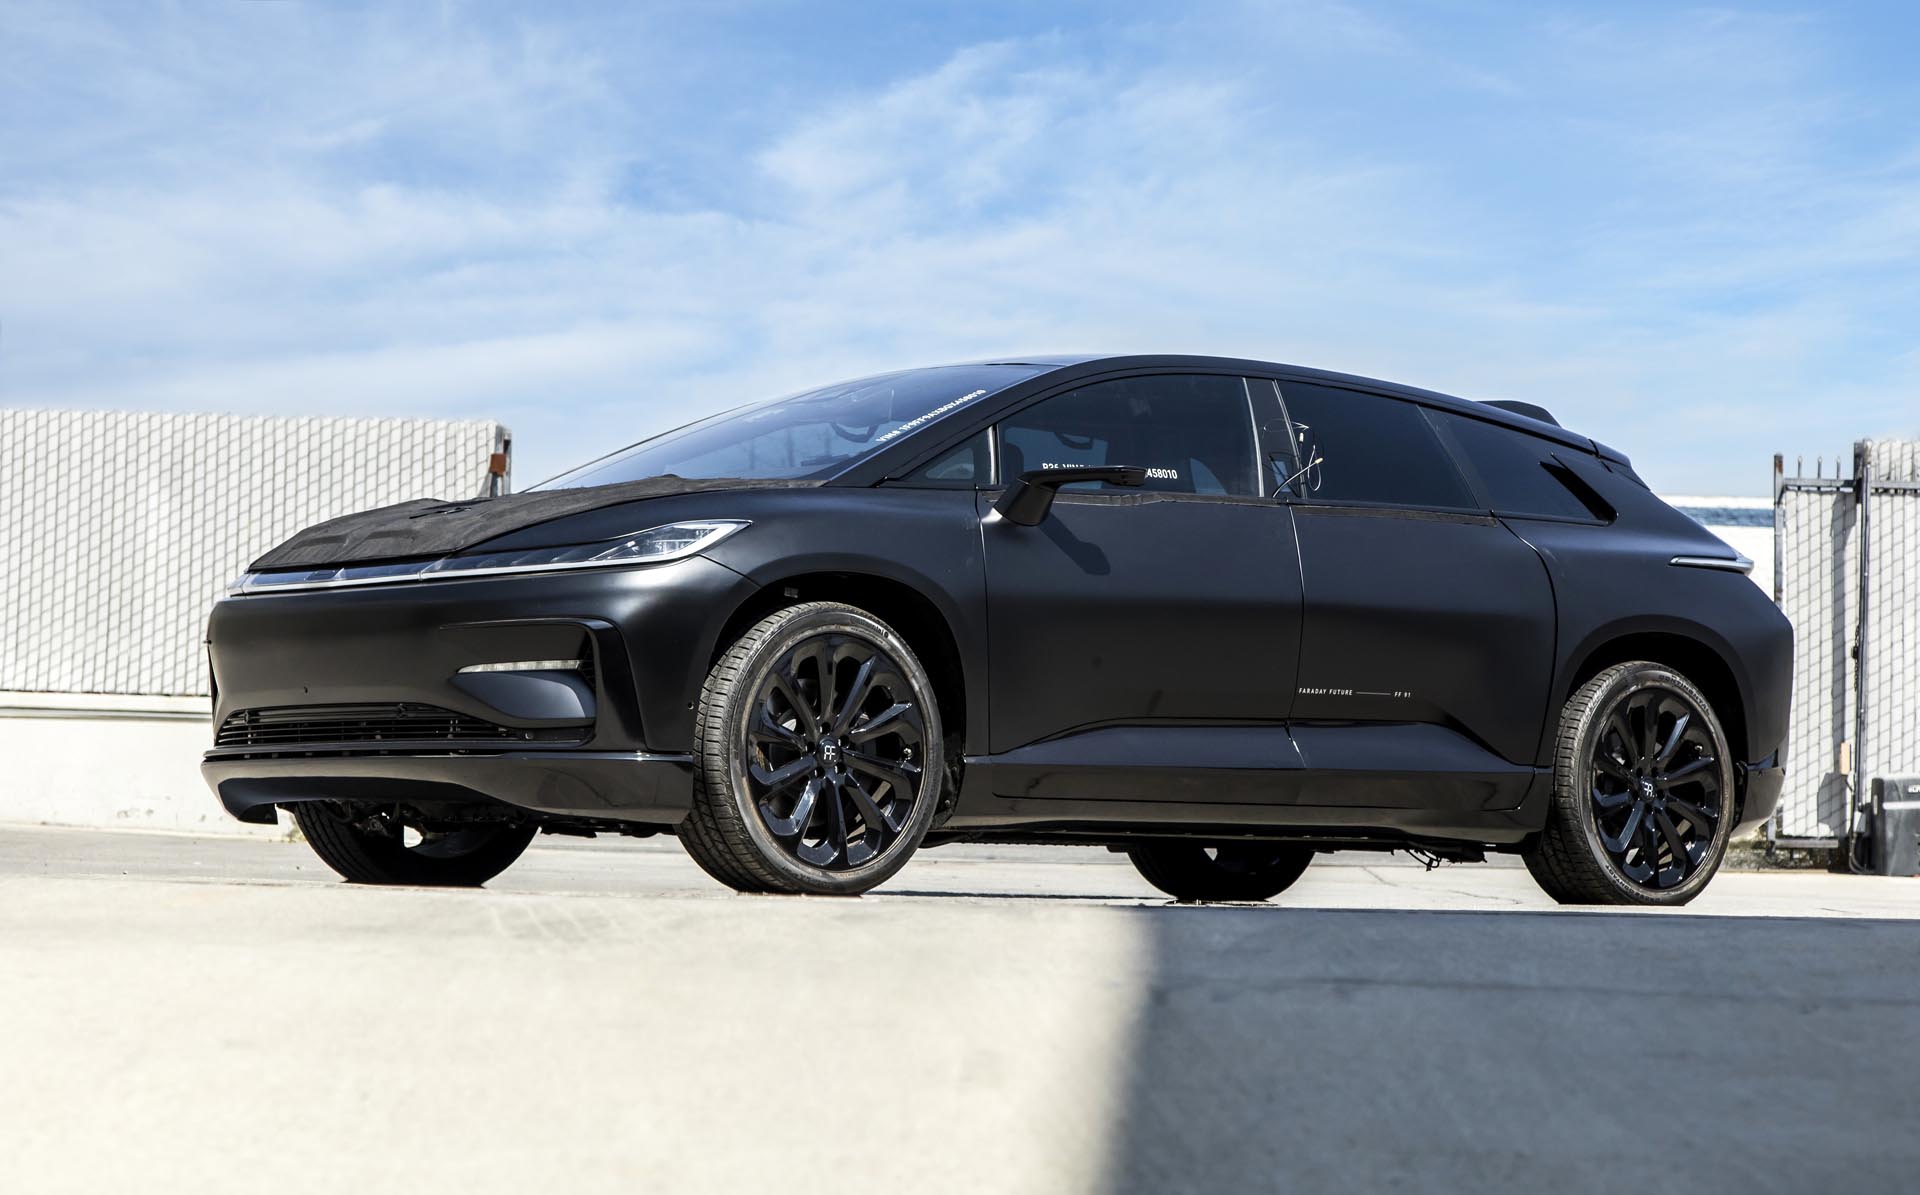 Record Breaking Faraday Future Prototype Evs Are Up For Auction Wilson S Media - roblox buy super cars for police city tycoon 2 2 kia